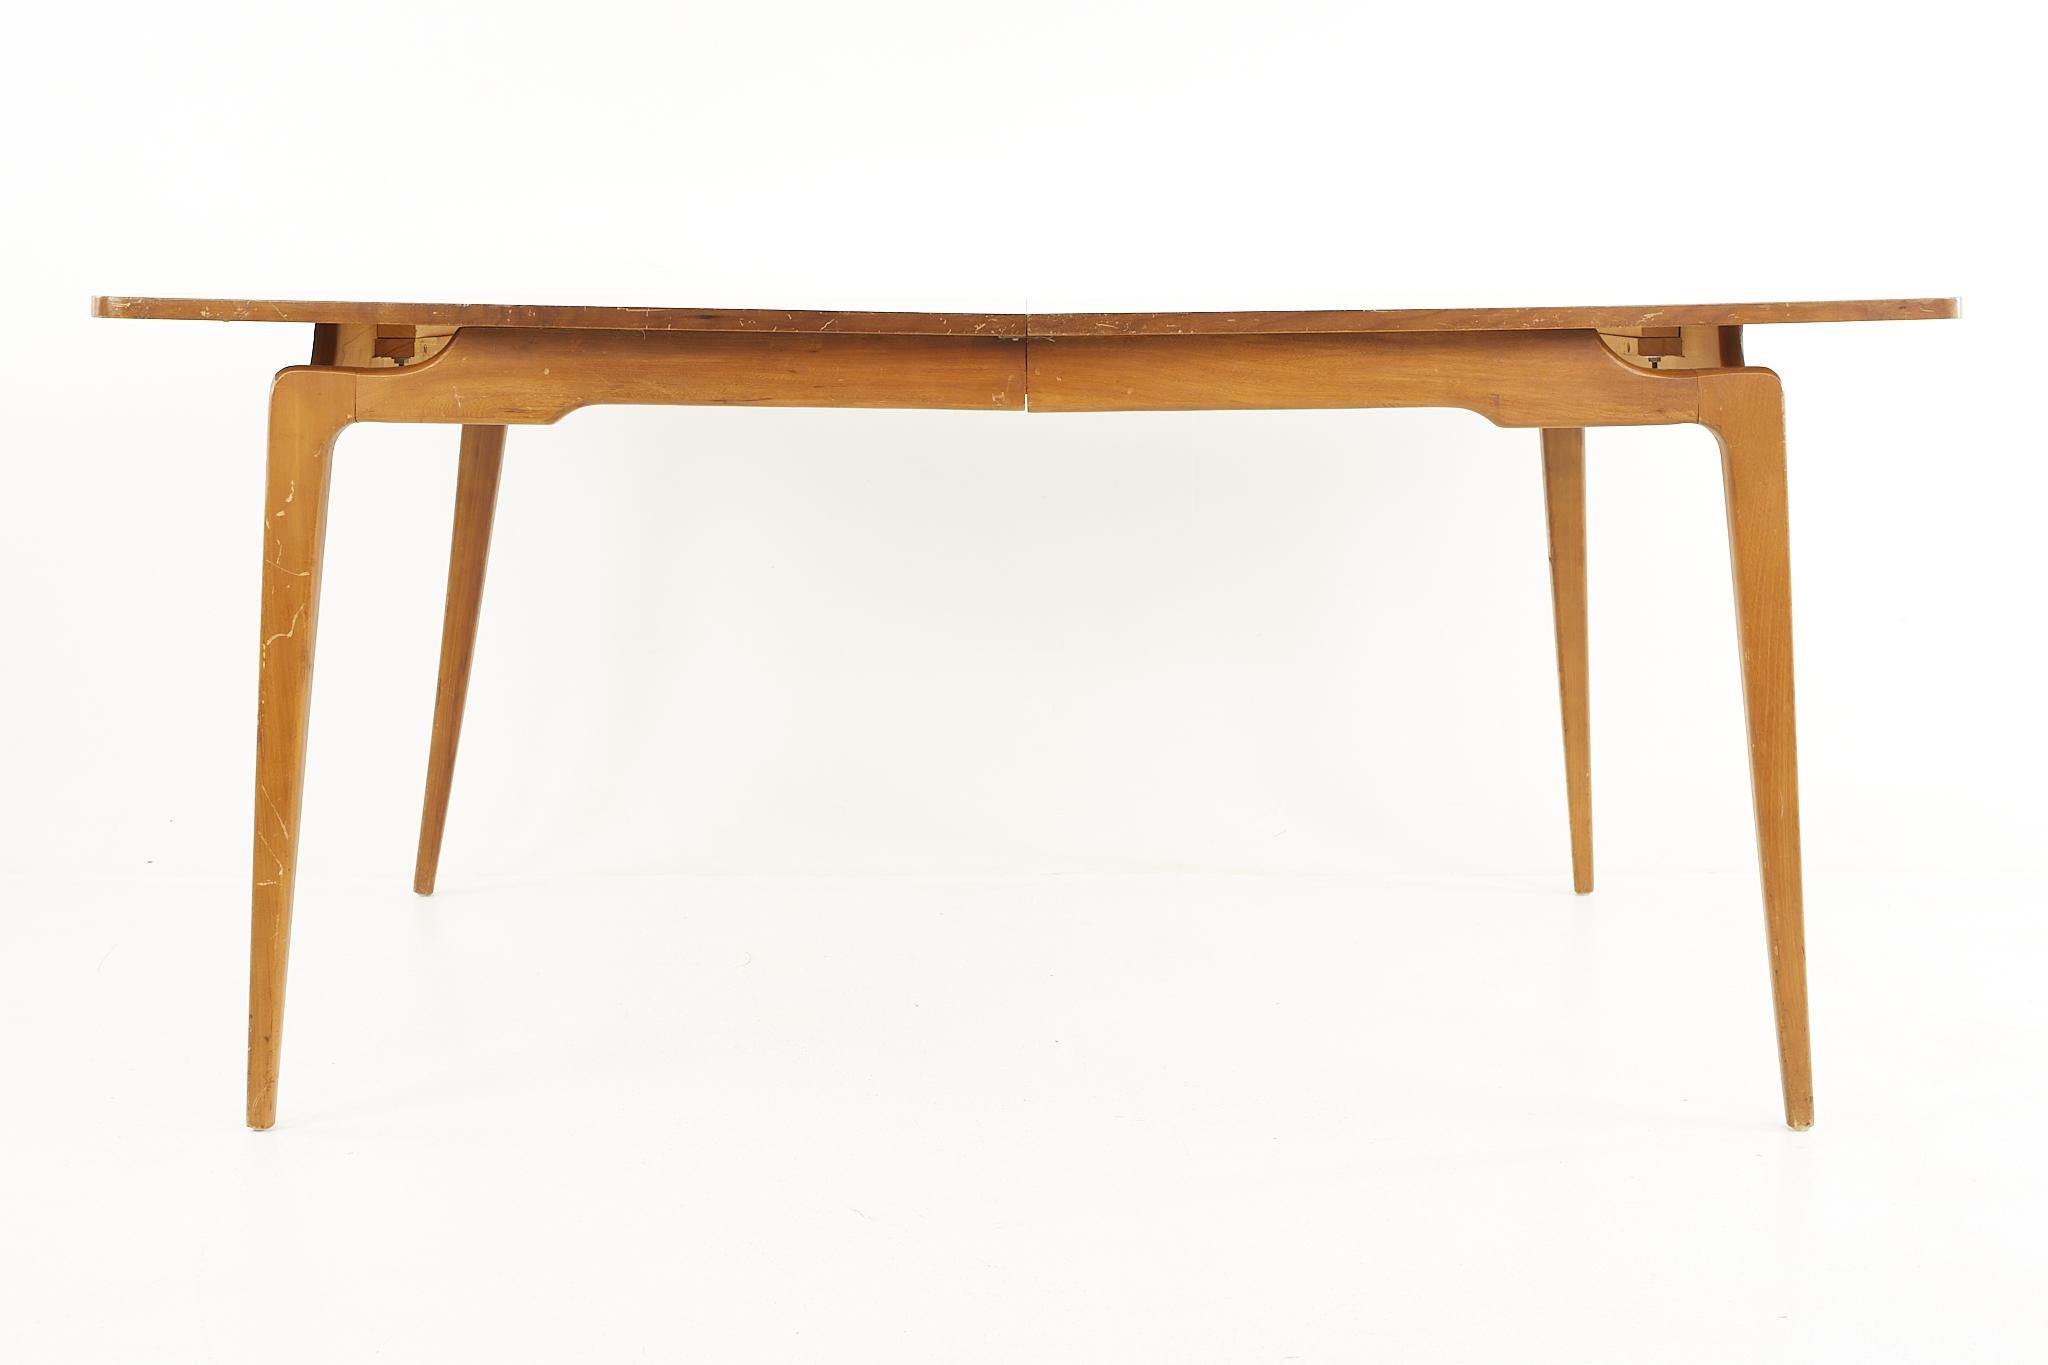 Mid Century Expanding Walnut Dining Table with 2 Leaves

This table measures: 66 wide x 42 deep x 30 high, with a chair clearance of 26 inches, each leaf measures 18 inches wide, making a maximum table width of 102 inches when both leaves are